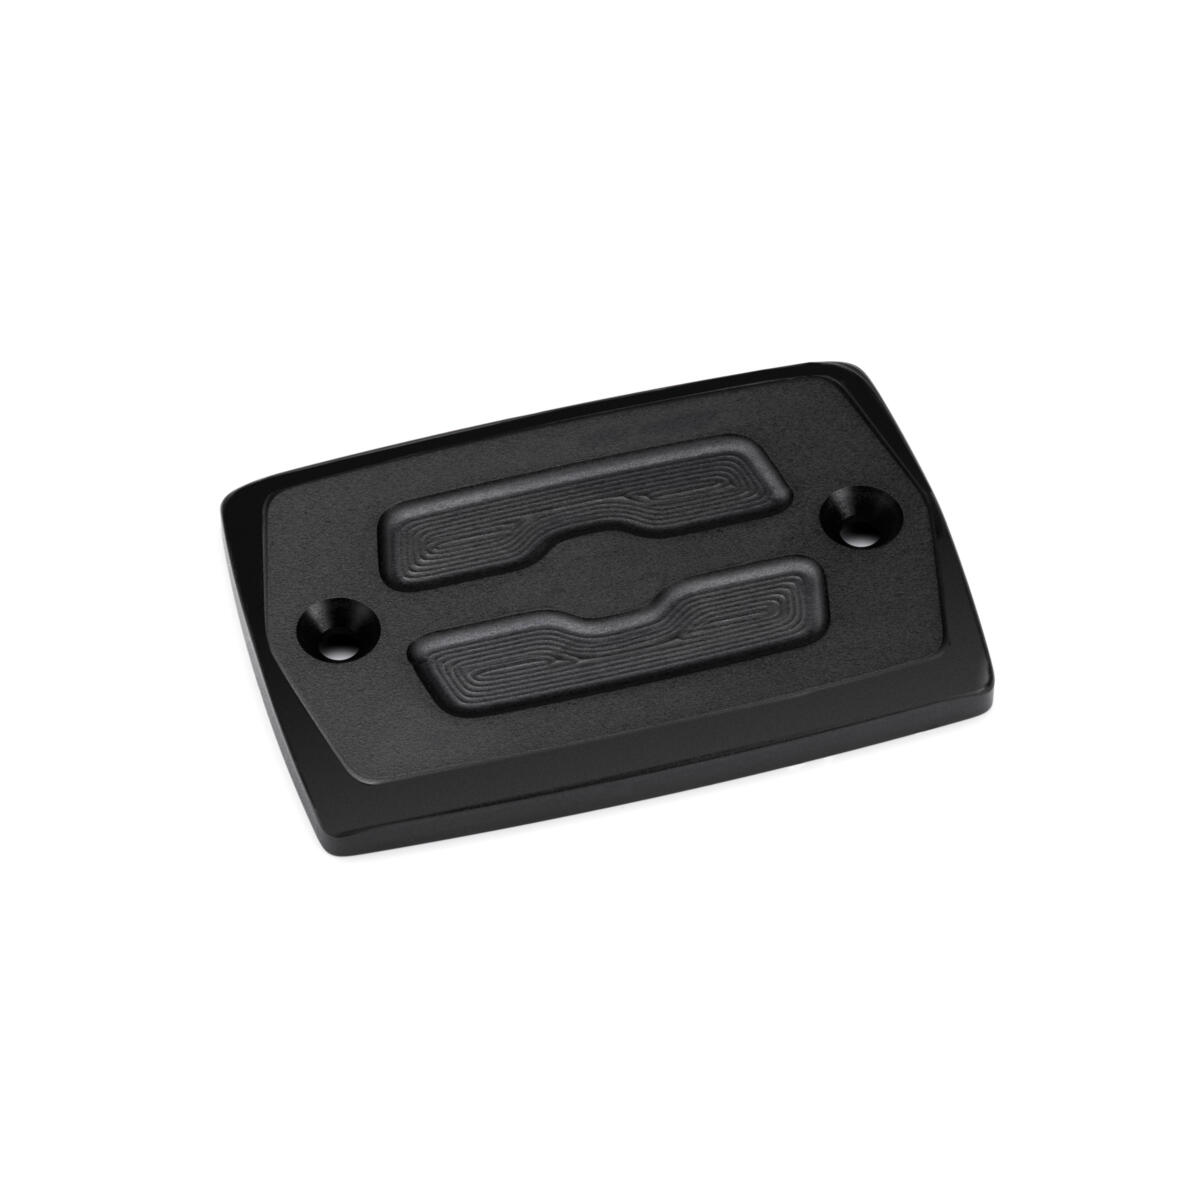 High-quality black anodized finished cover to replace the original brake fluid reservoir cover.